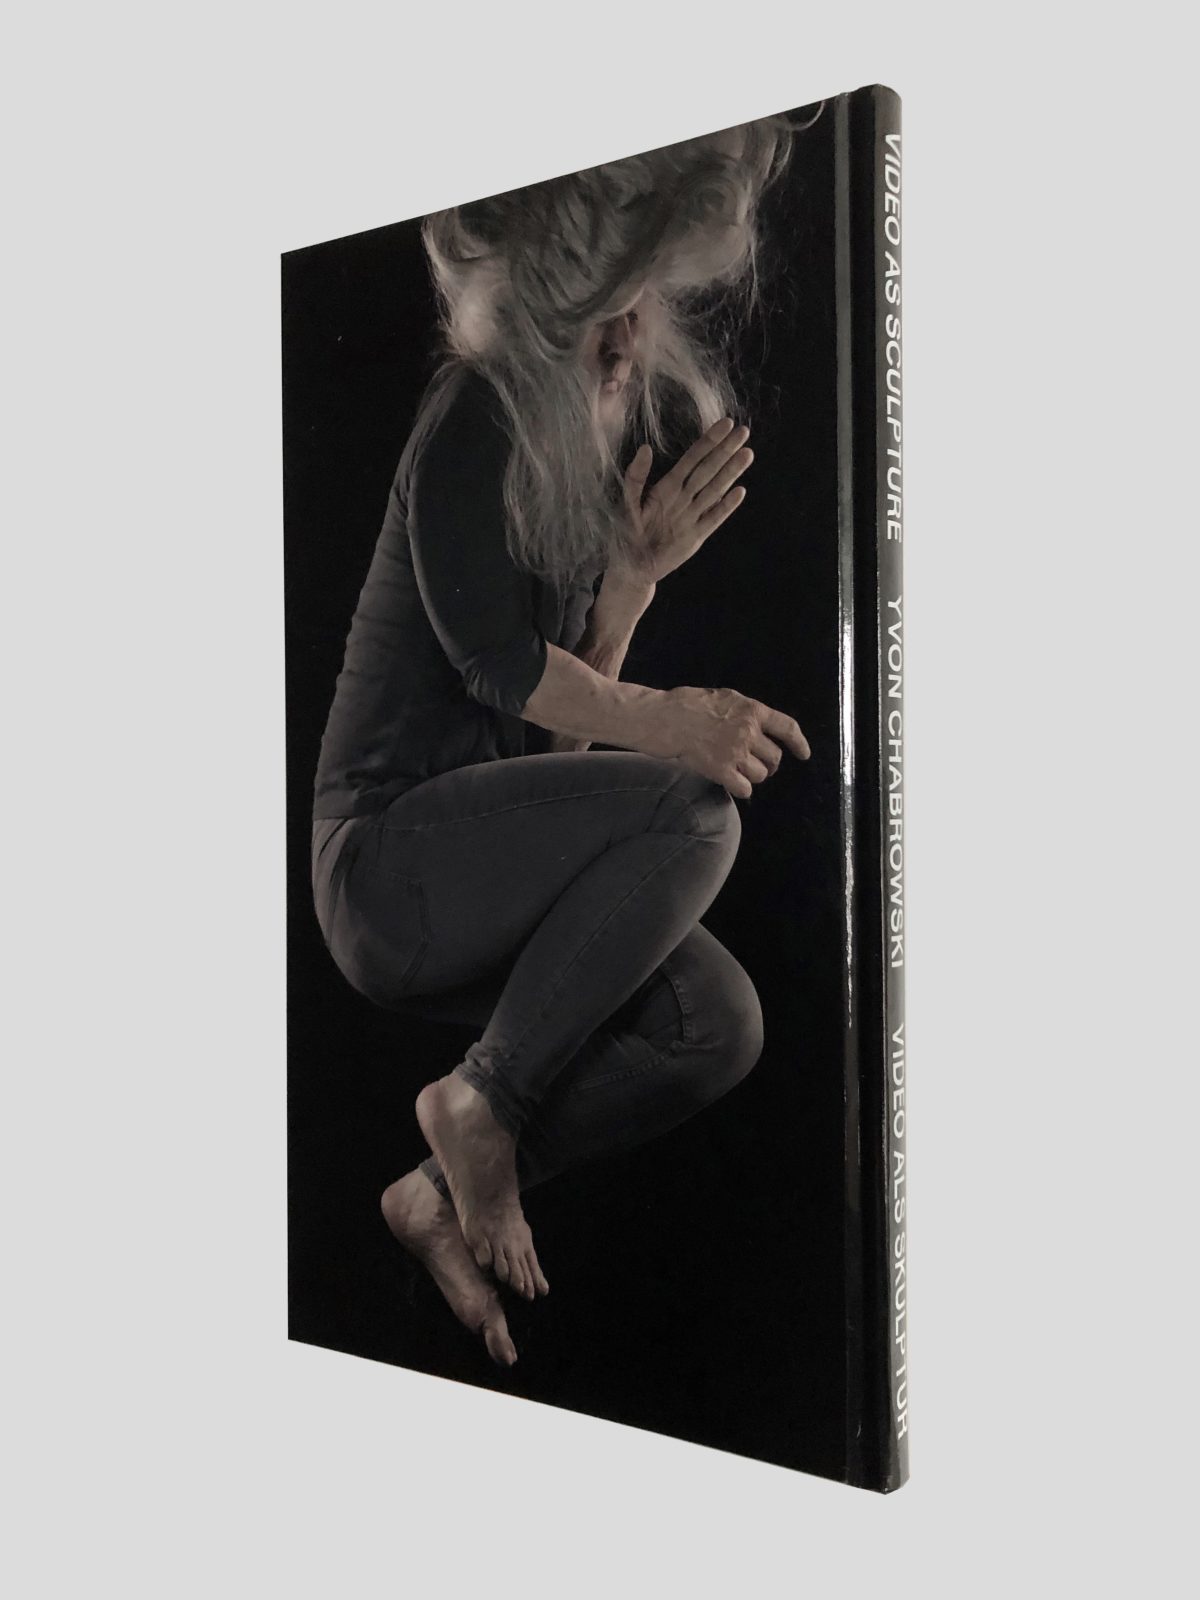 VIDEO AS SCULPTURE by Spector Books